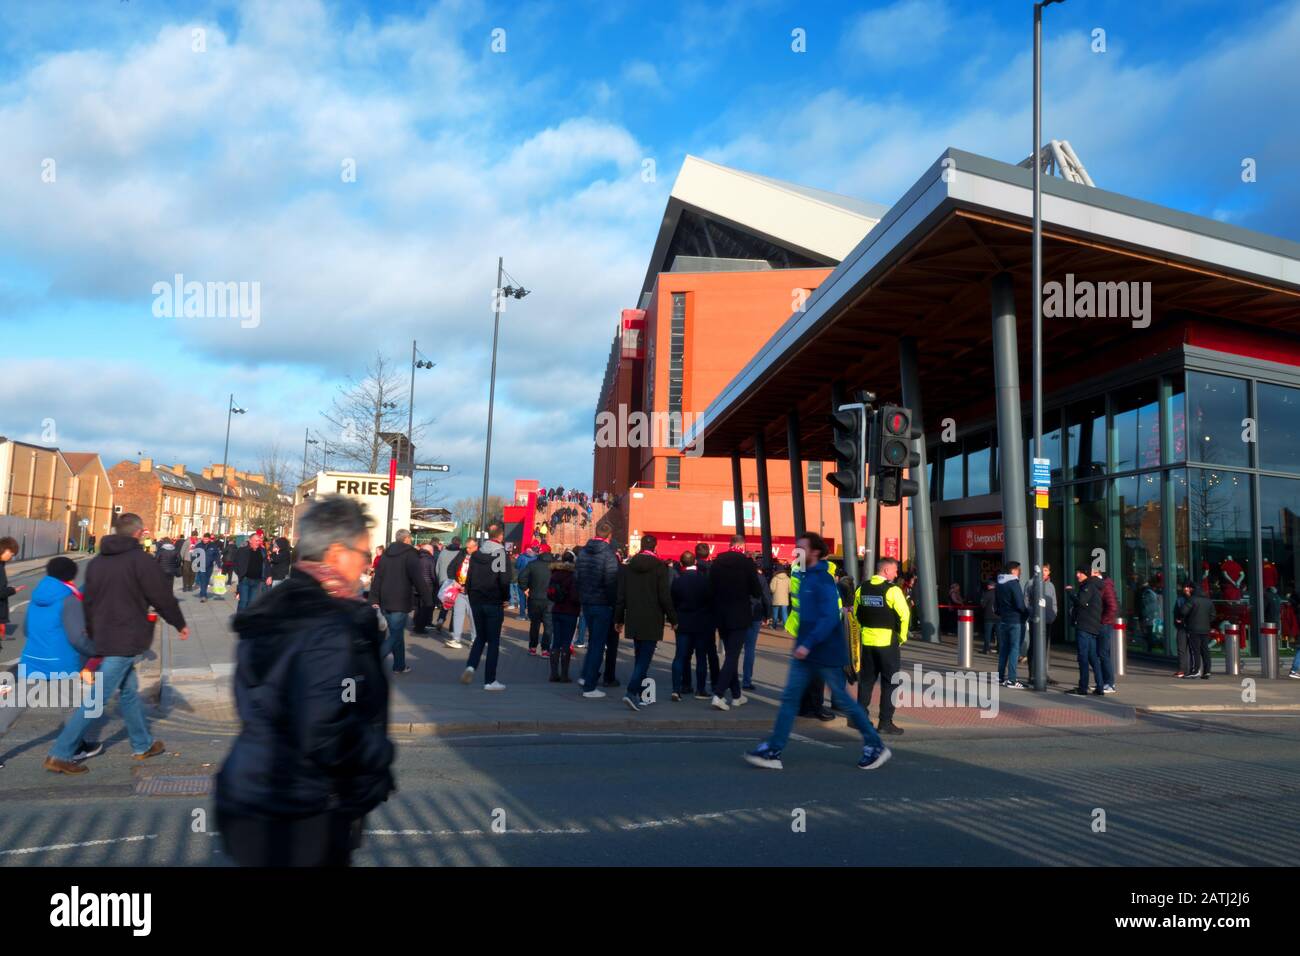 Liverpool supporters going to the match with the new club shop and main stand in the background. Stock Photo